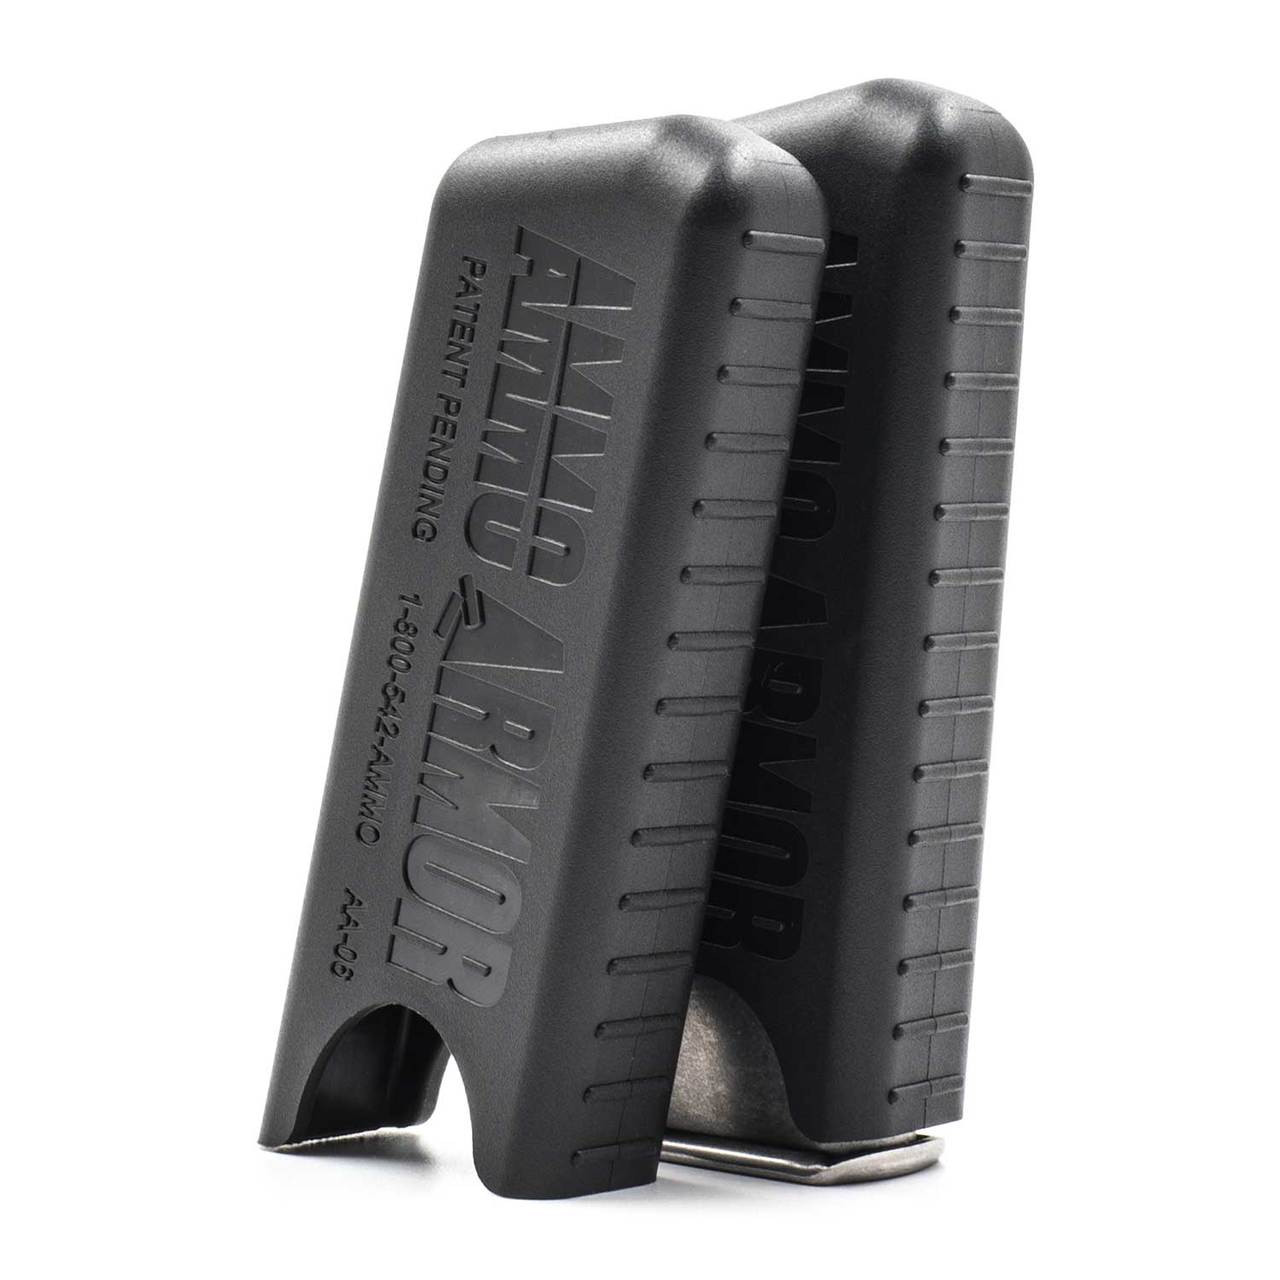 Walther PPK & PPK/S Magazine